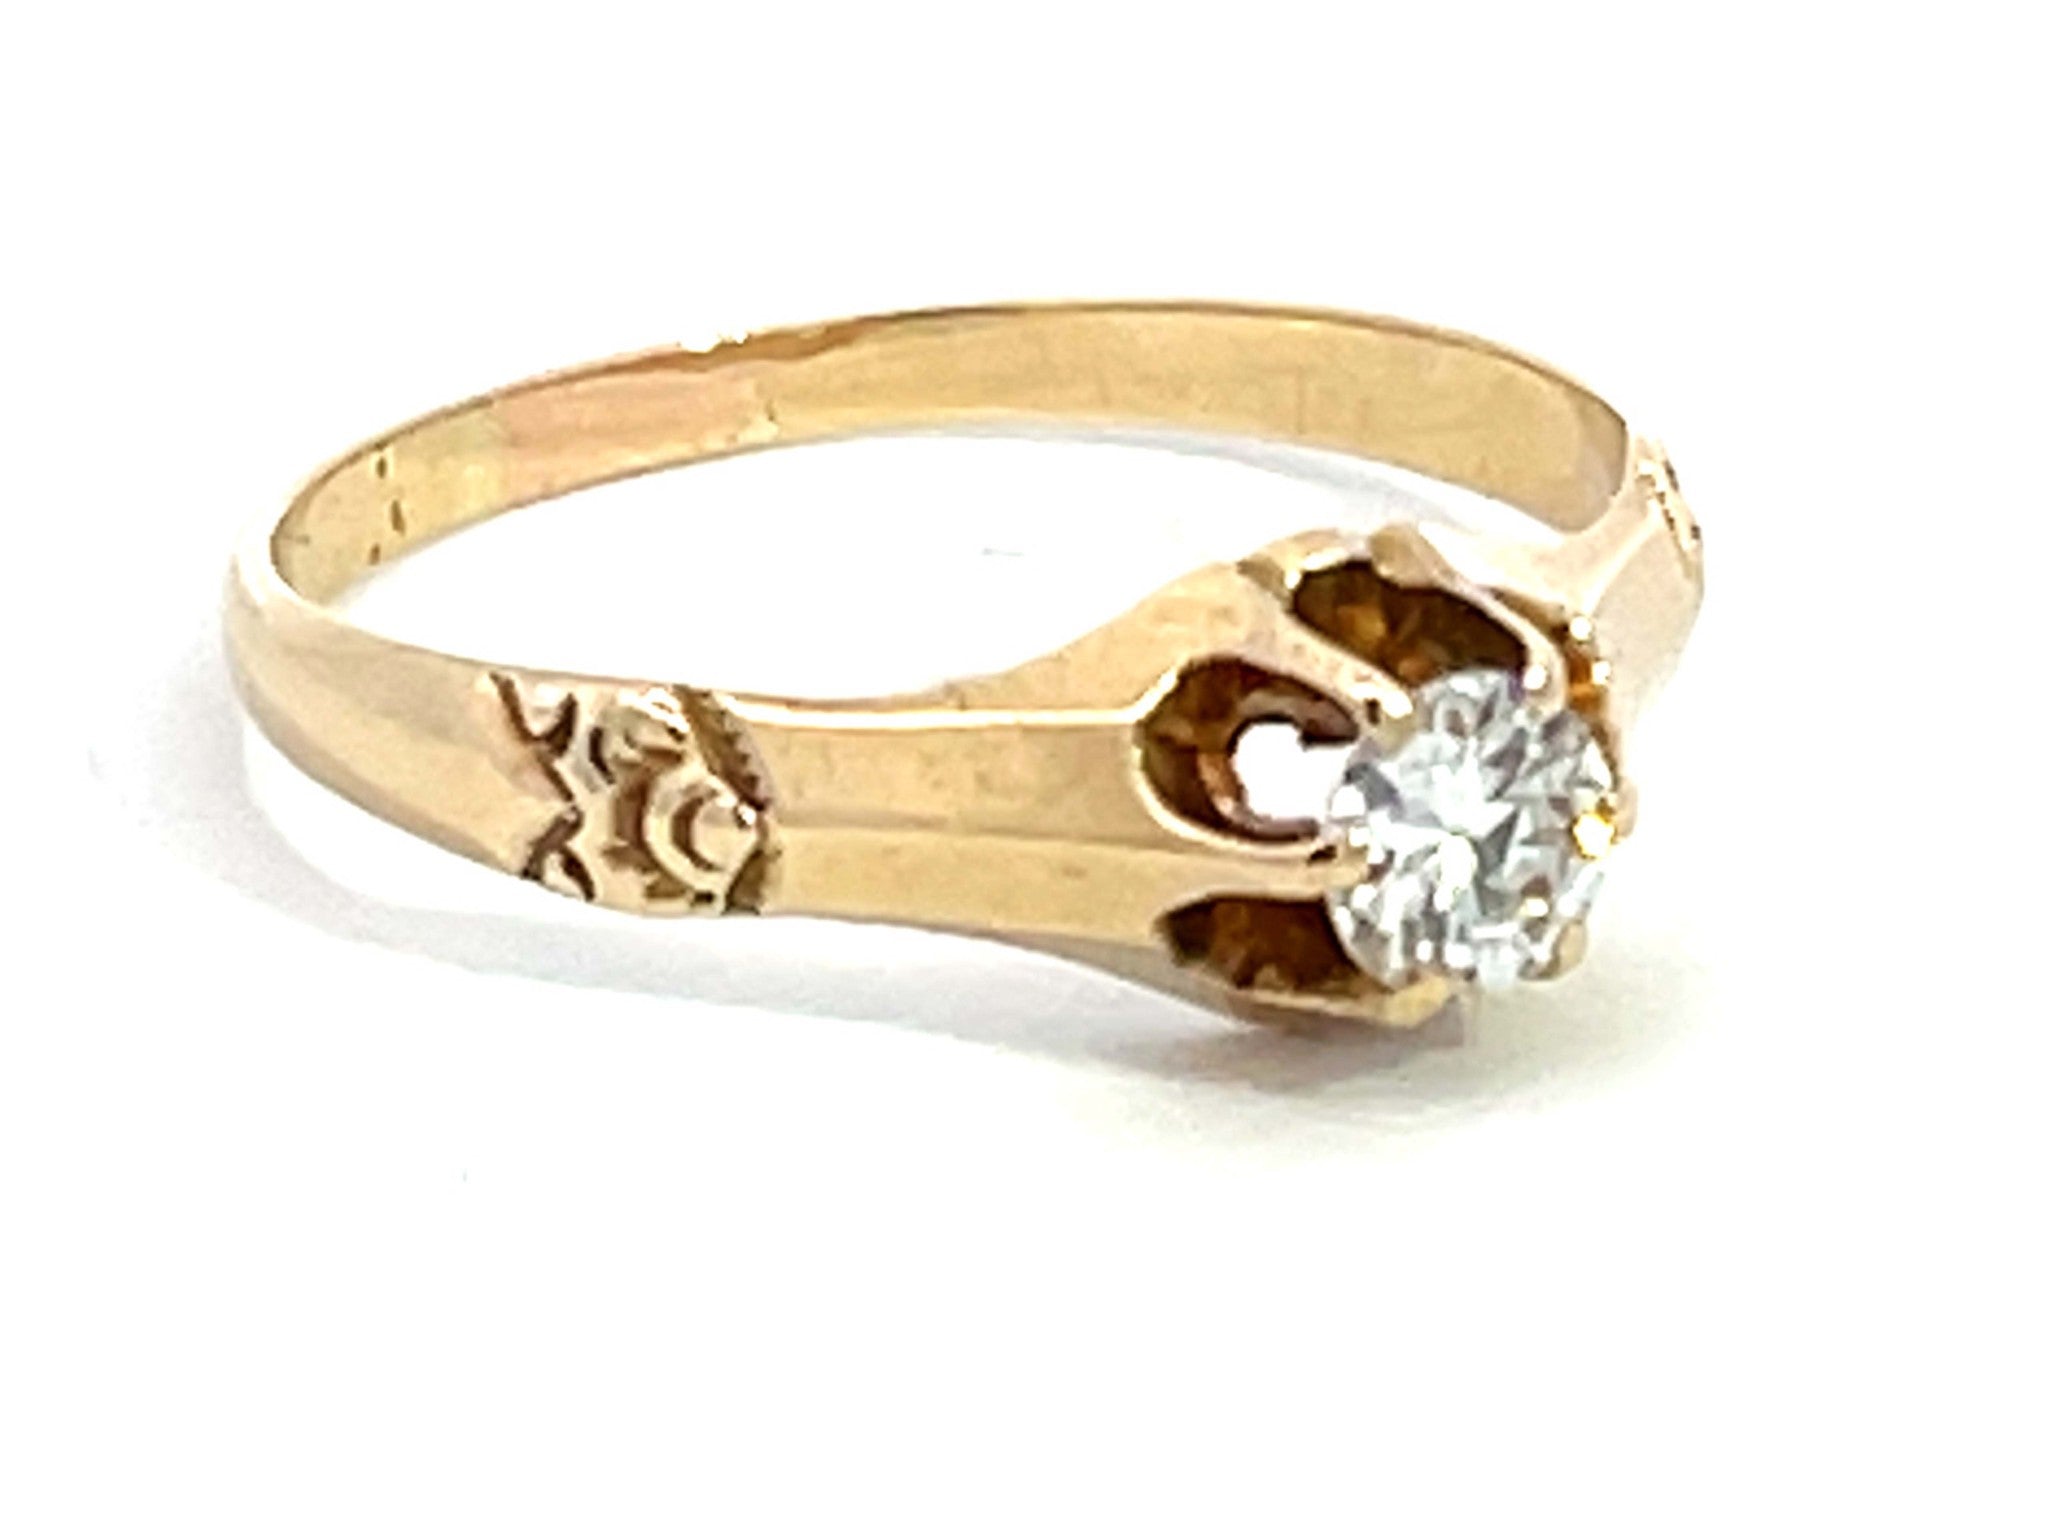 Vintage Solitaire Diamond Ring in 14k Yellow Gold